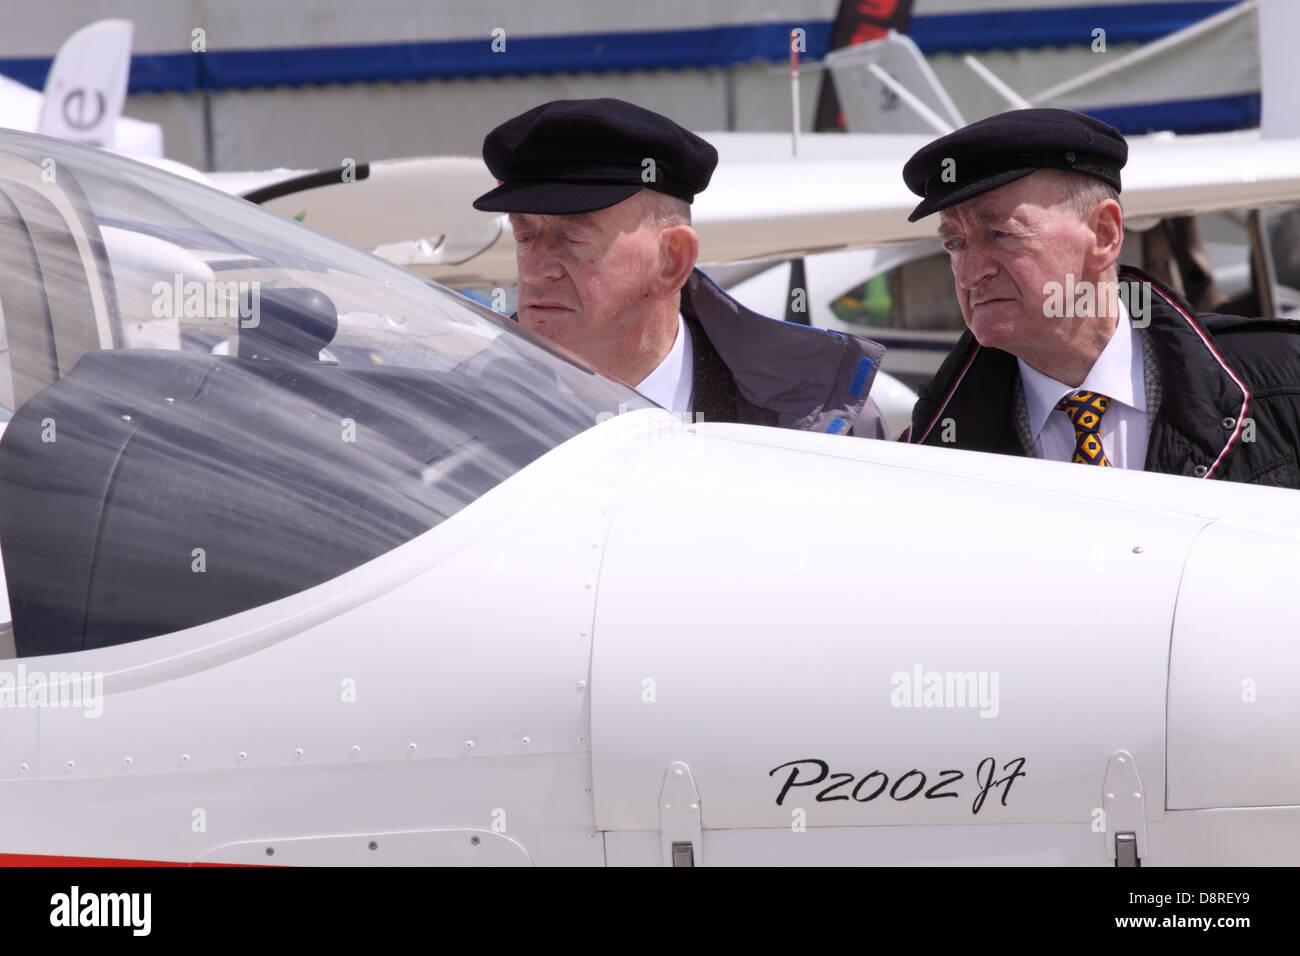 Two elderly men look at new aircraft for sale at an aviation trade fair show in the UK Stock Photo